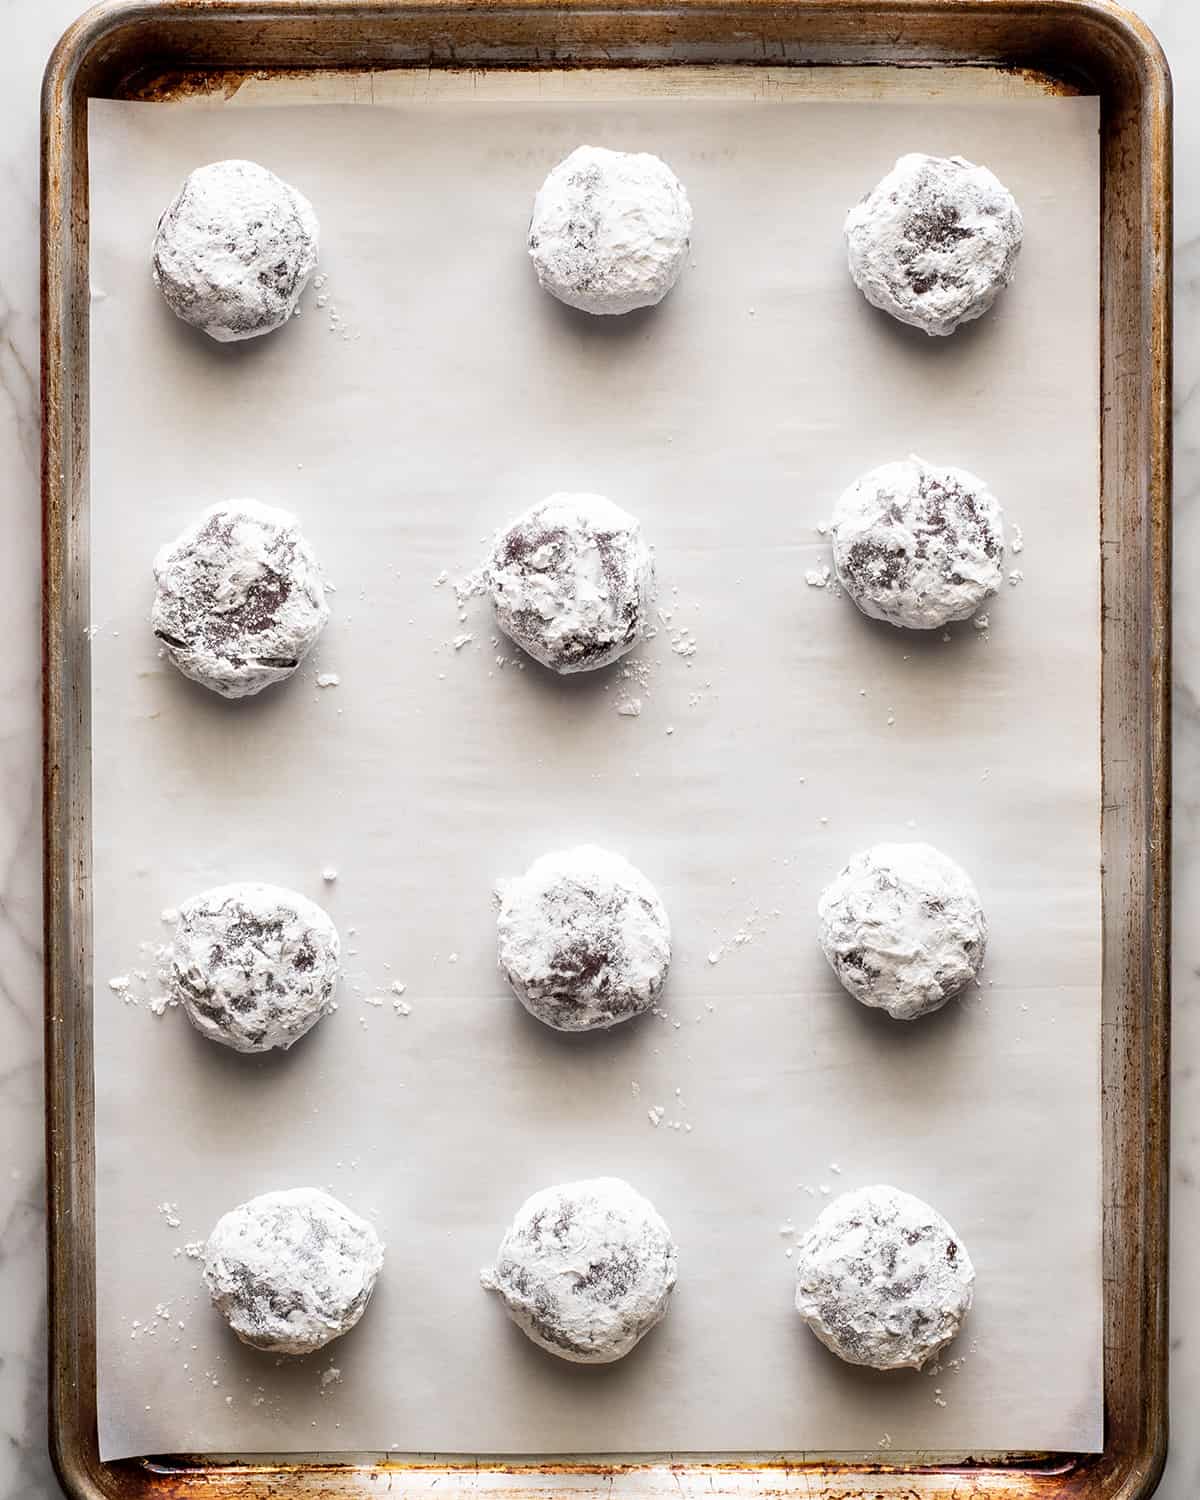 crinkles coated in powdered sugar on a baking sheet before baking